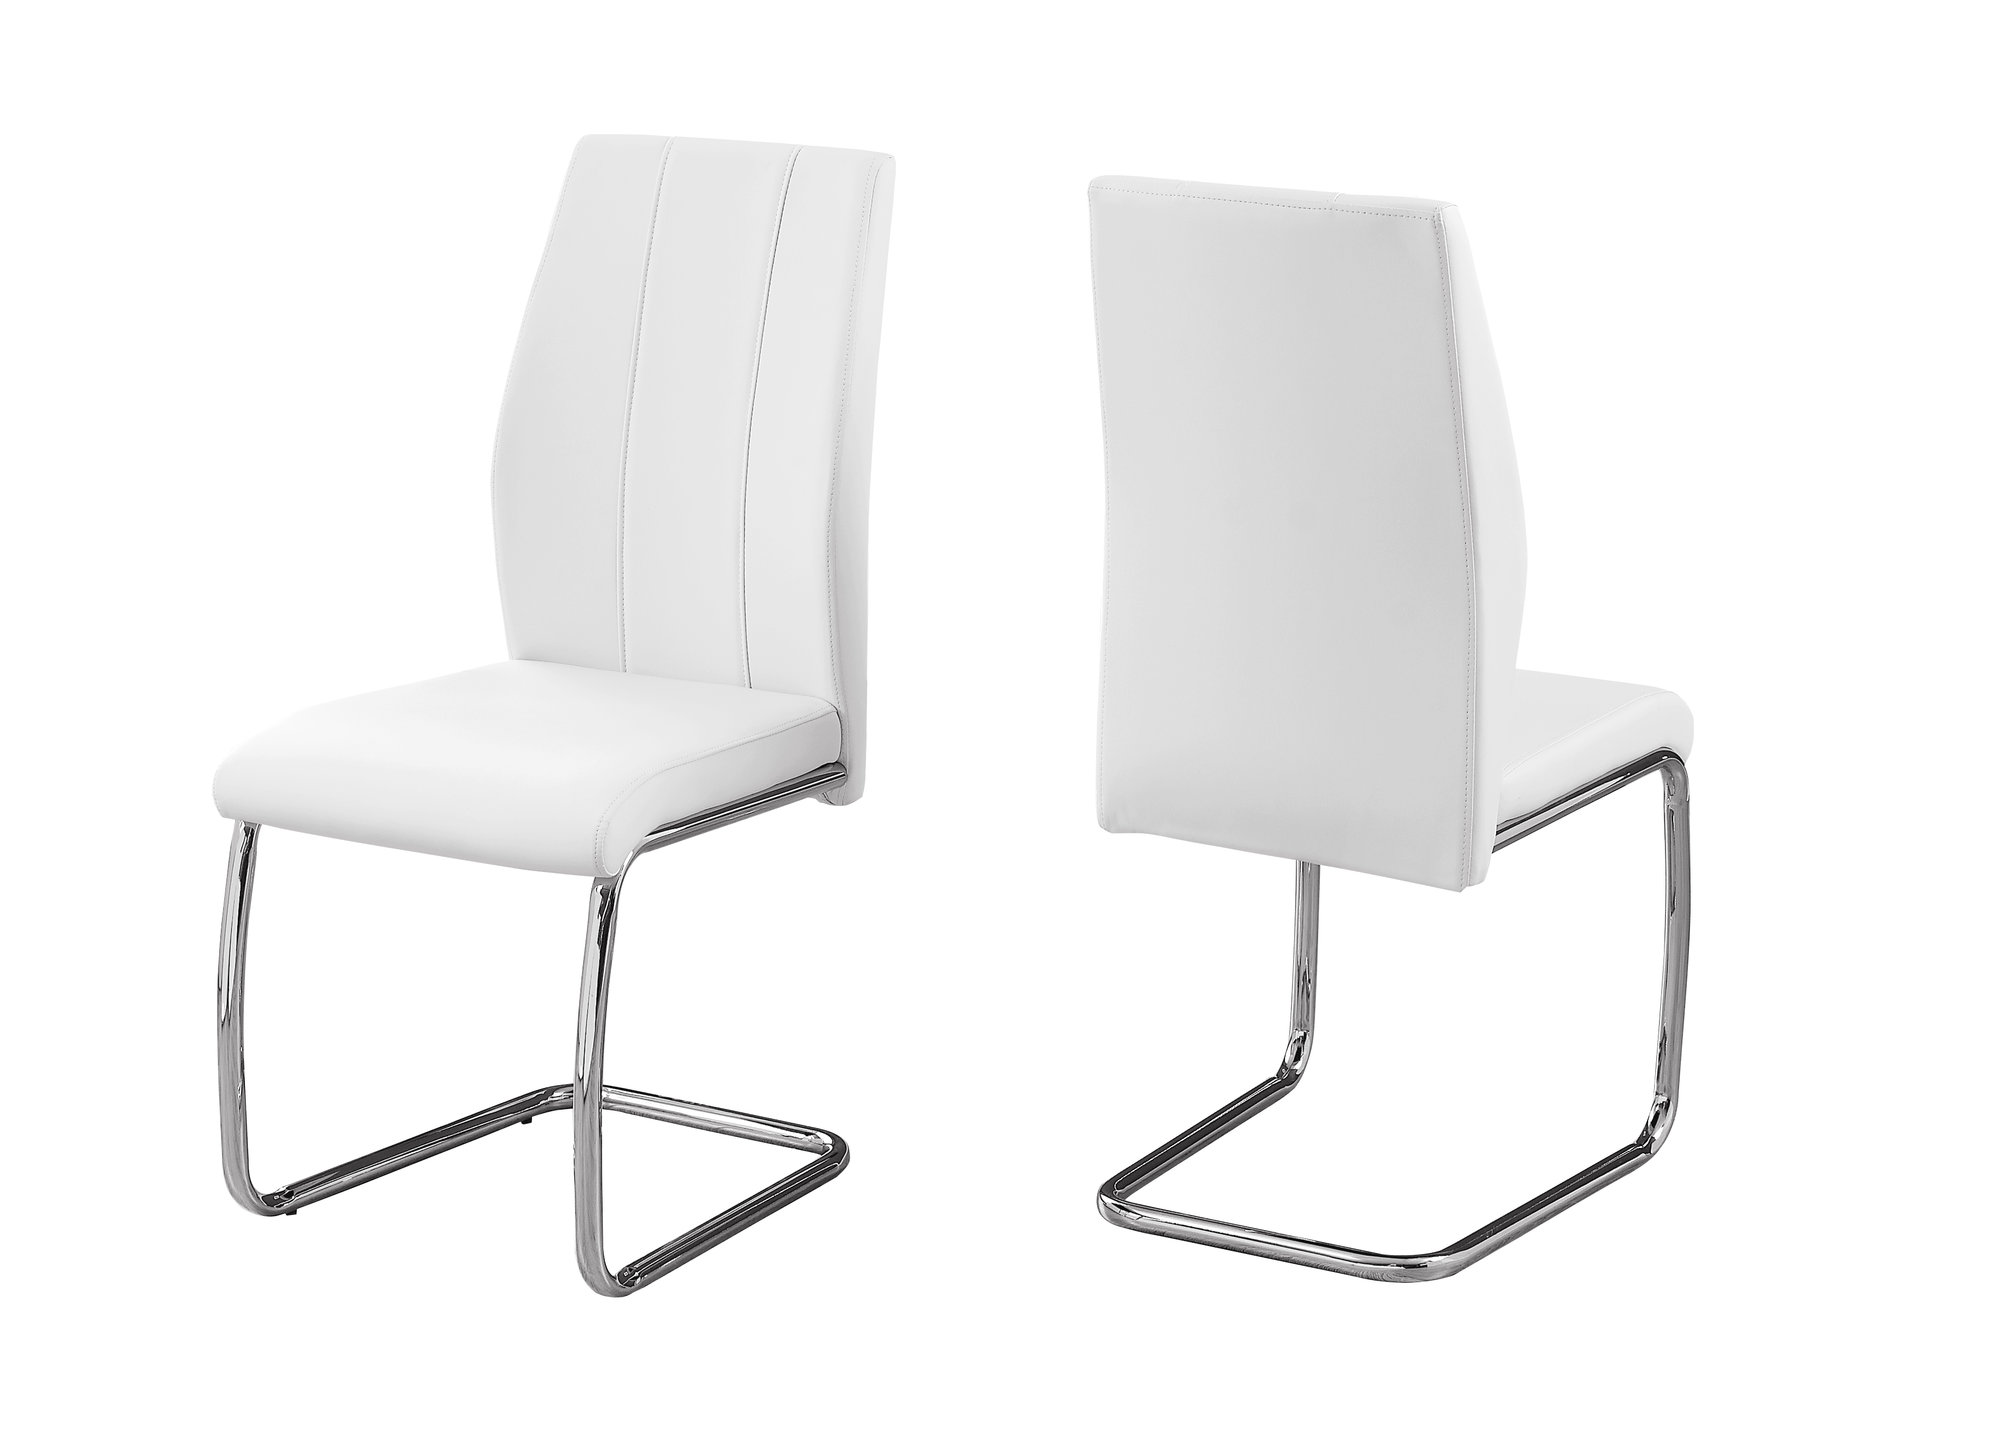 DINING CHAIR - 2PCS / 39"H / WHITE LEATHER-LOOK / CHROME